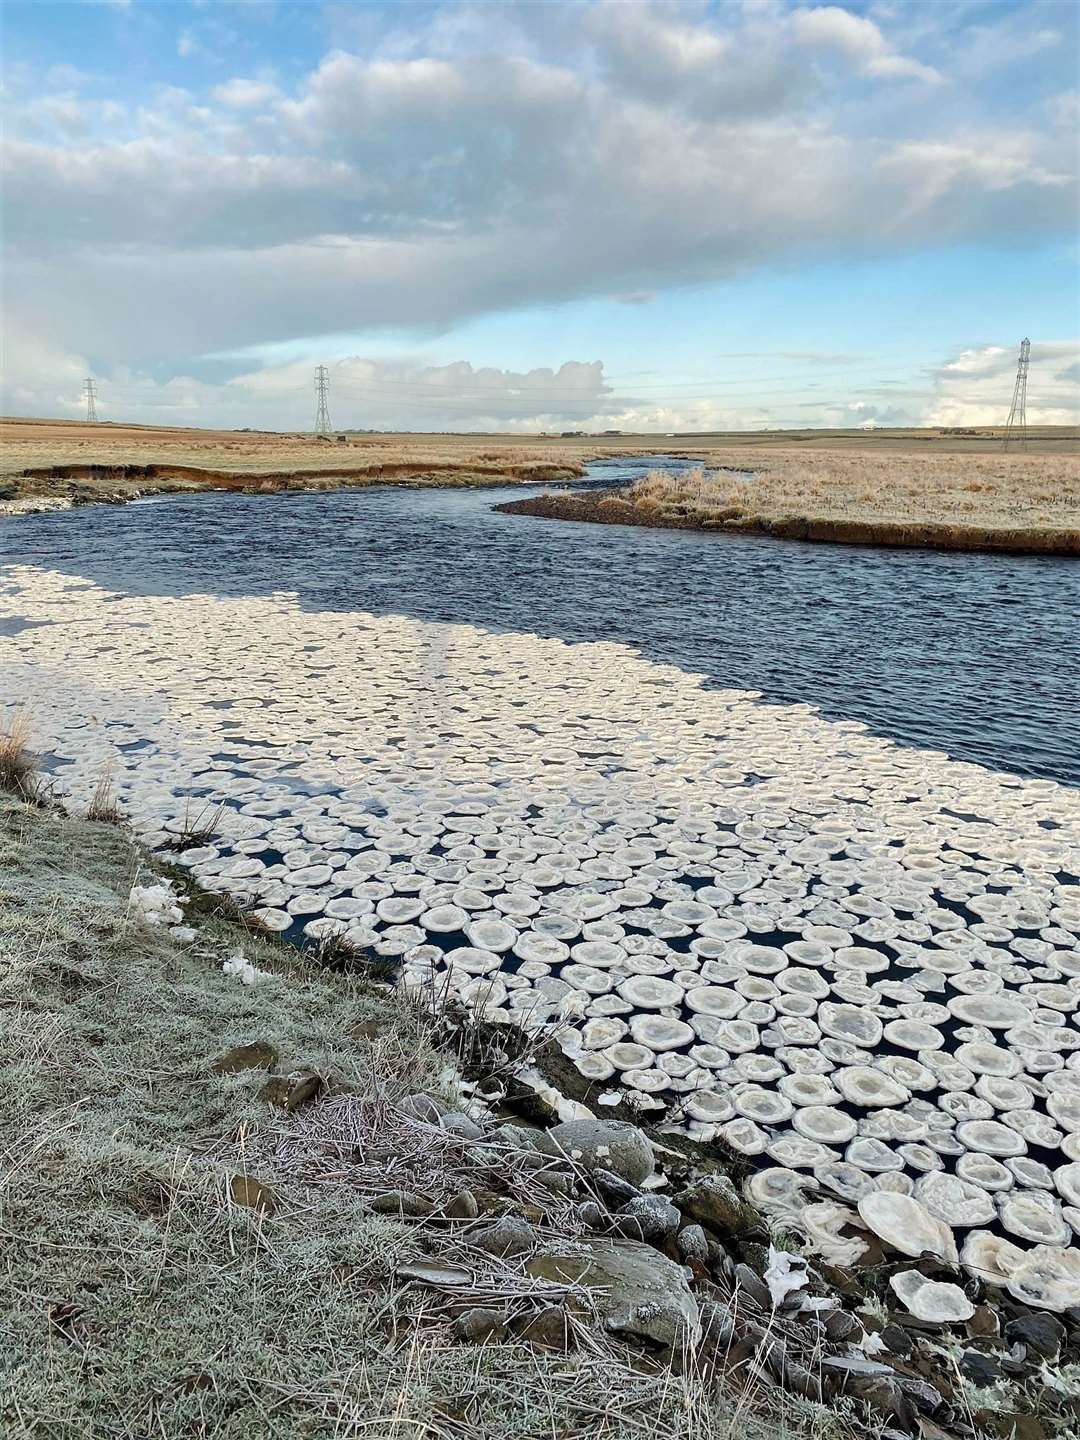 Jamie also took this picture showing hundreds of ice pancakes on December 28 last year at the upper Suilag pool on River Thurso.